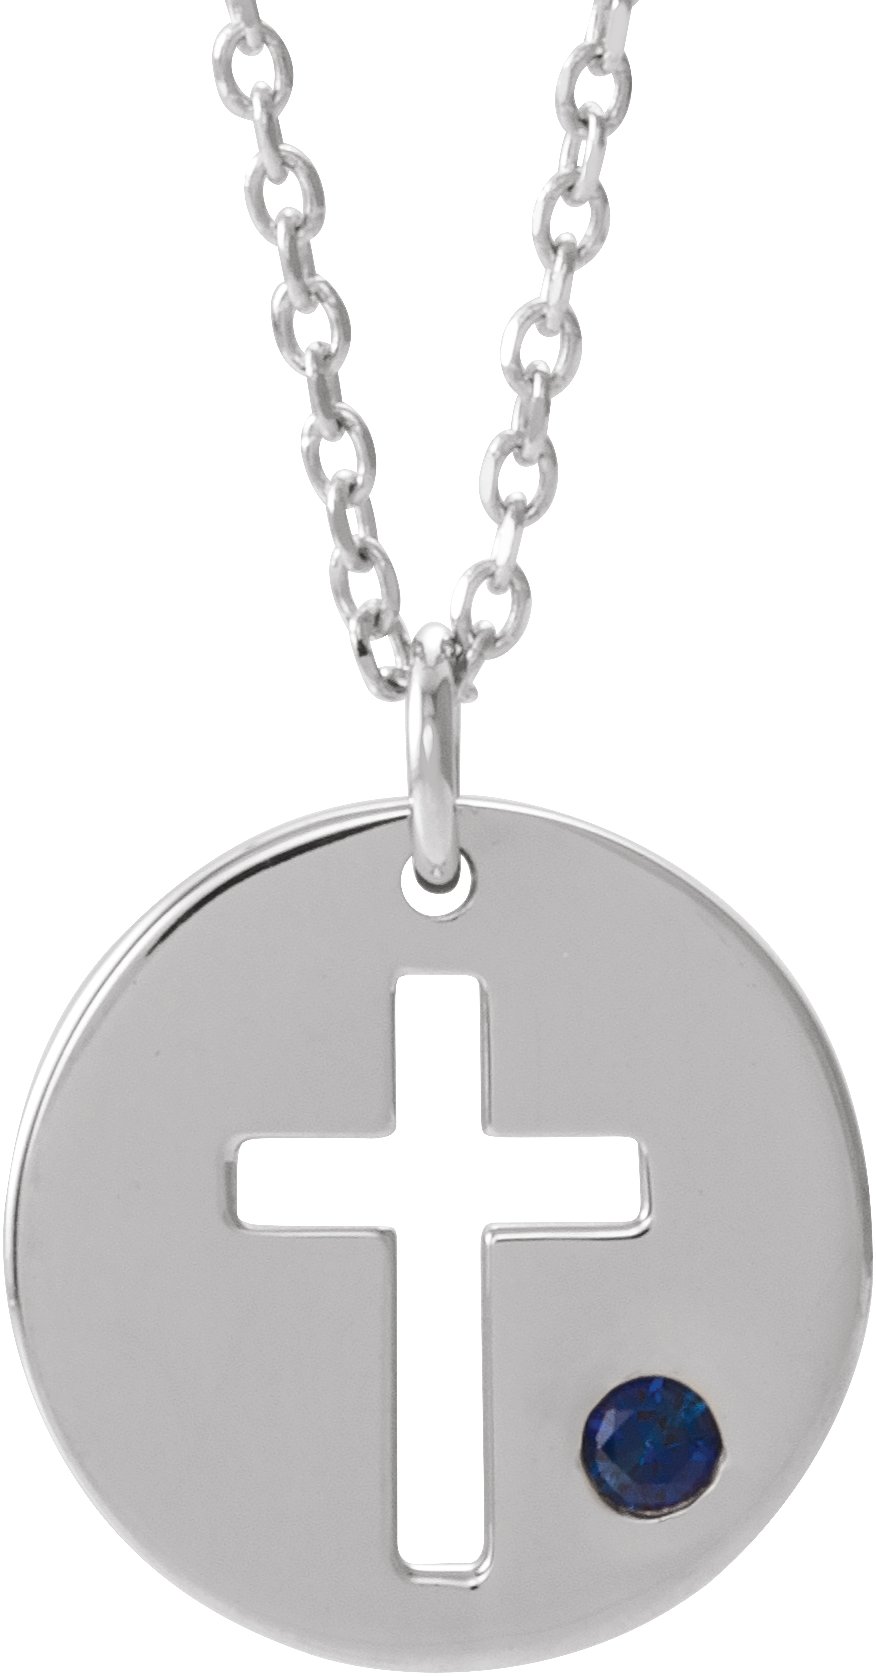 Sterling Silver Imitation Sapphire Pierced Cross Disc 16-18" Necklace 